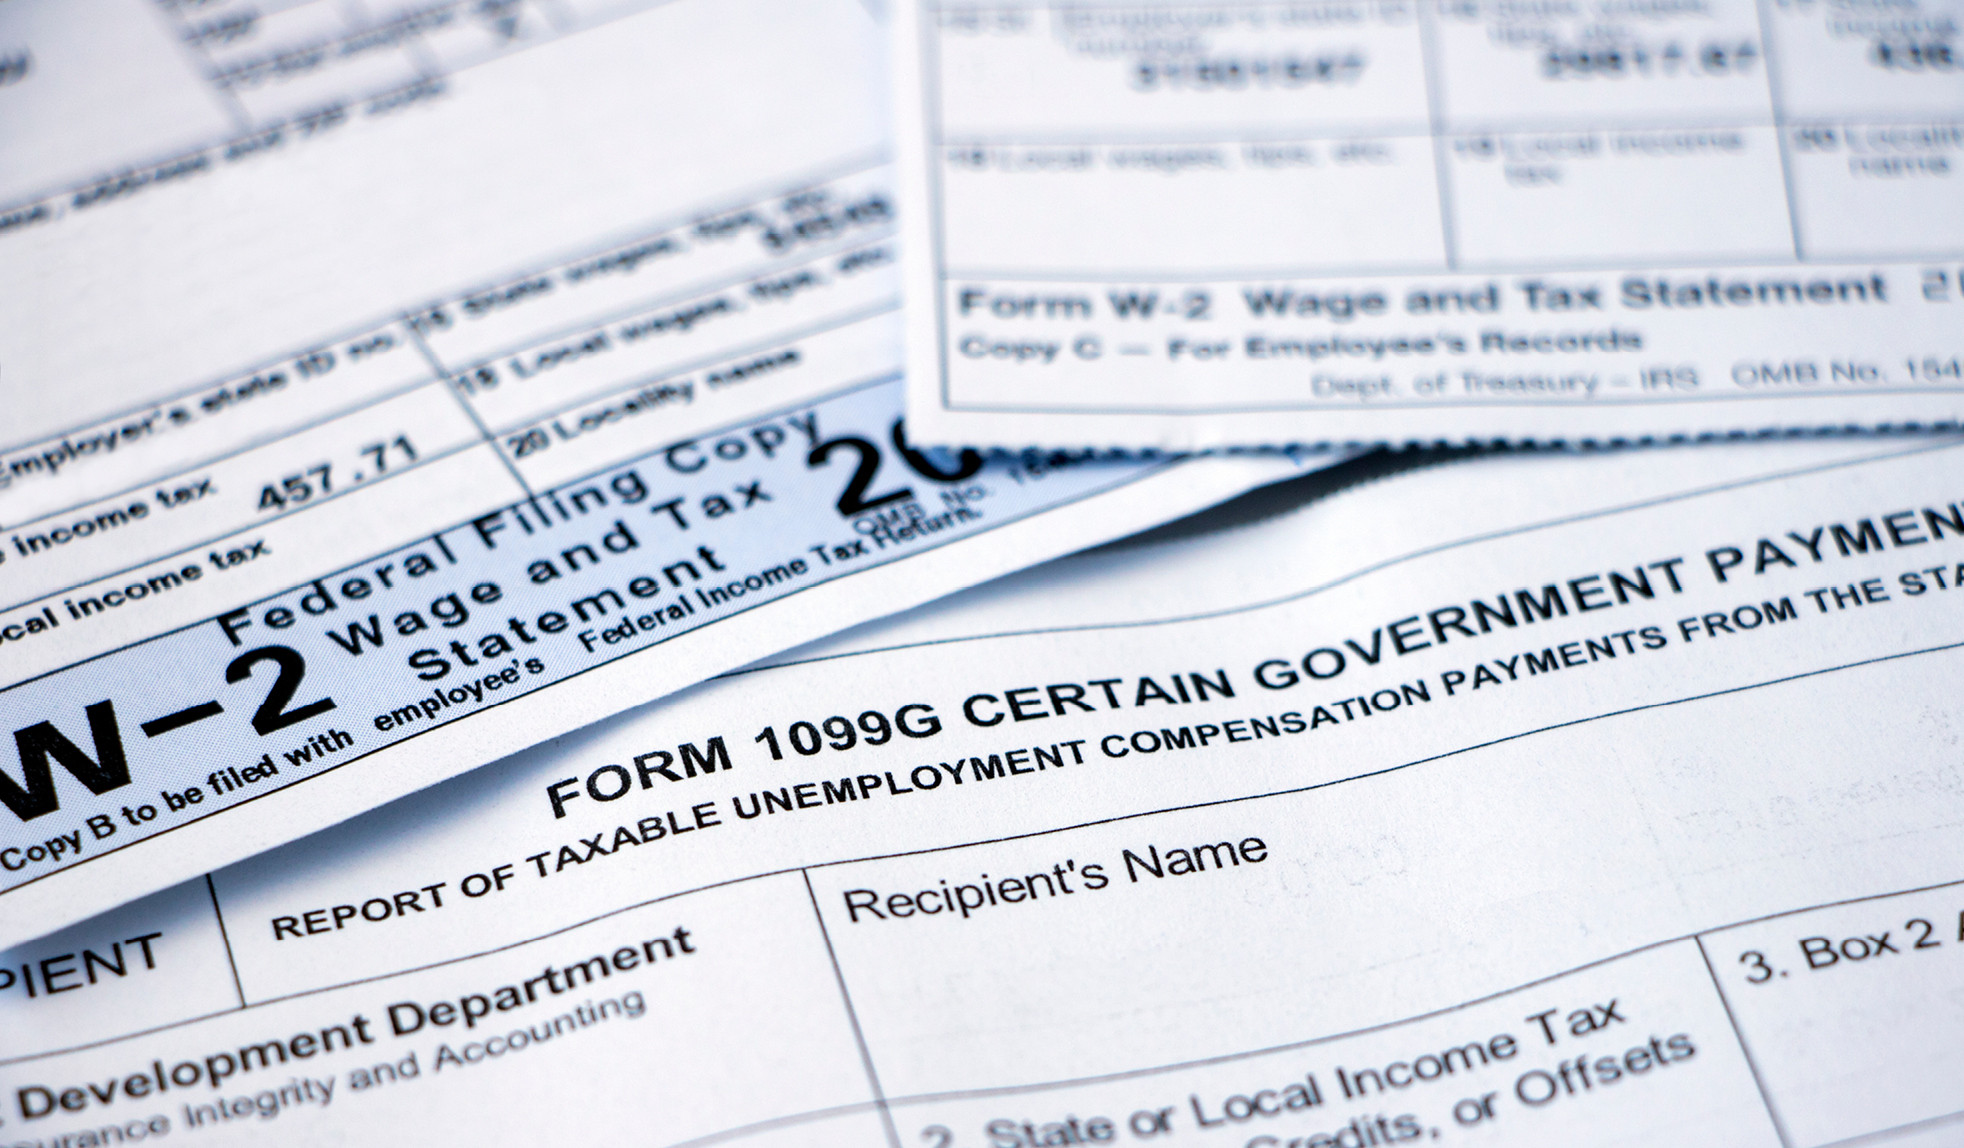 We're partnering with a number of organizations to offer FREE tax counseling to New Yorkers.